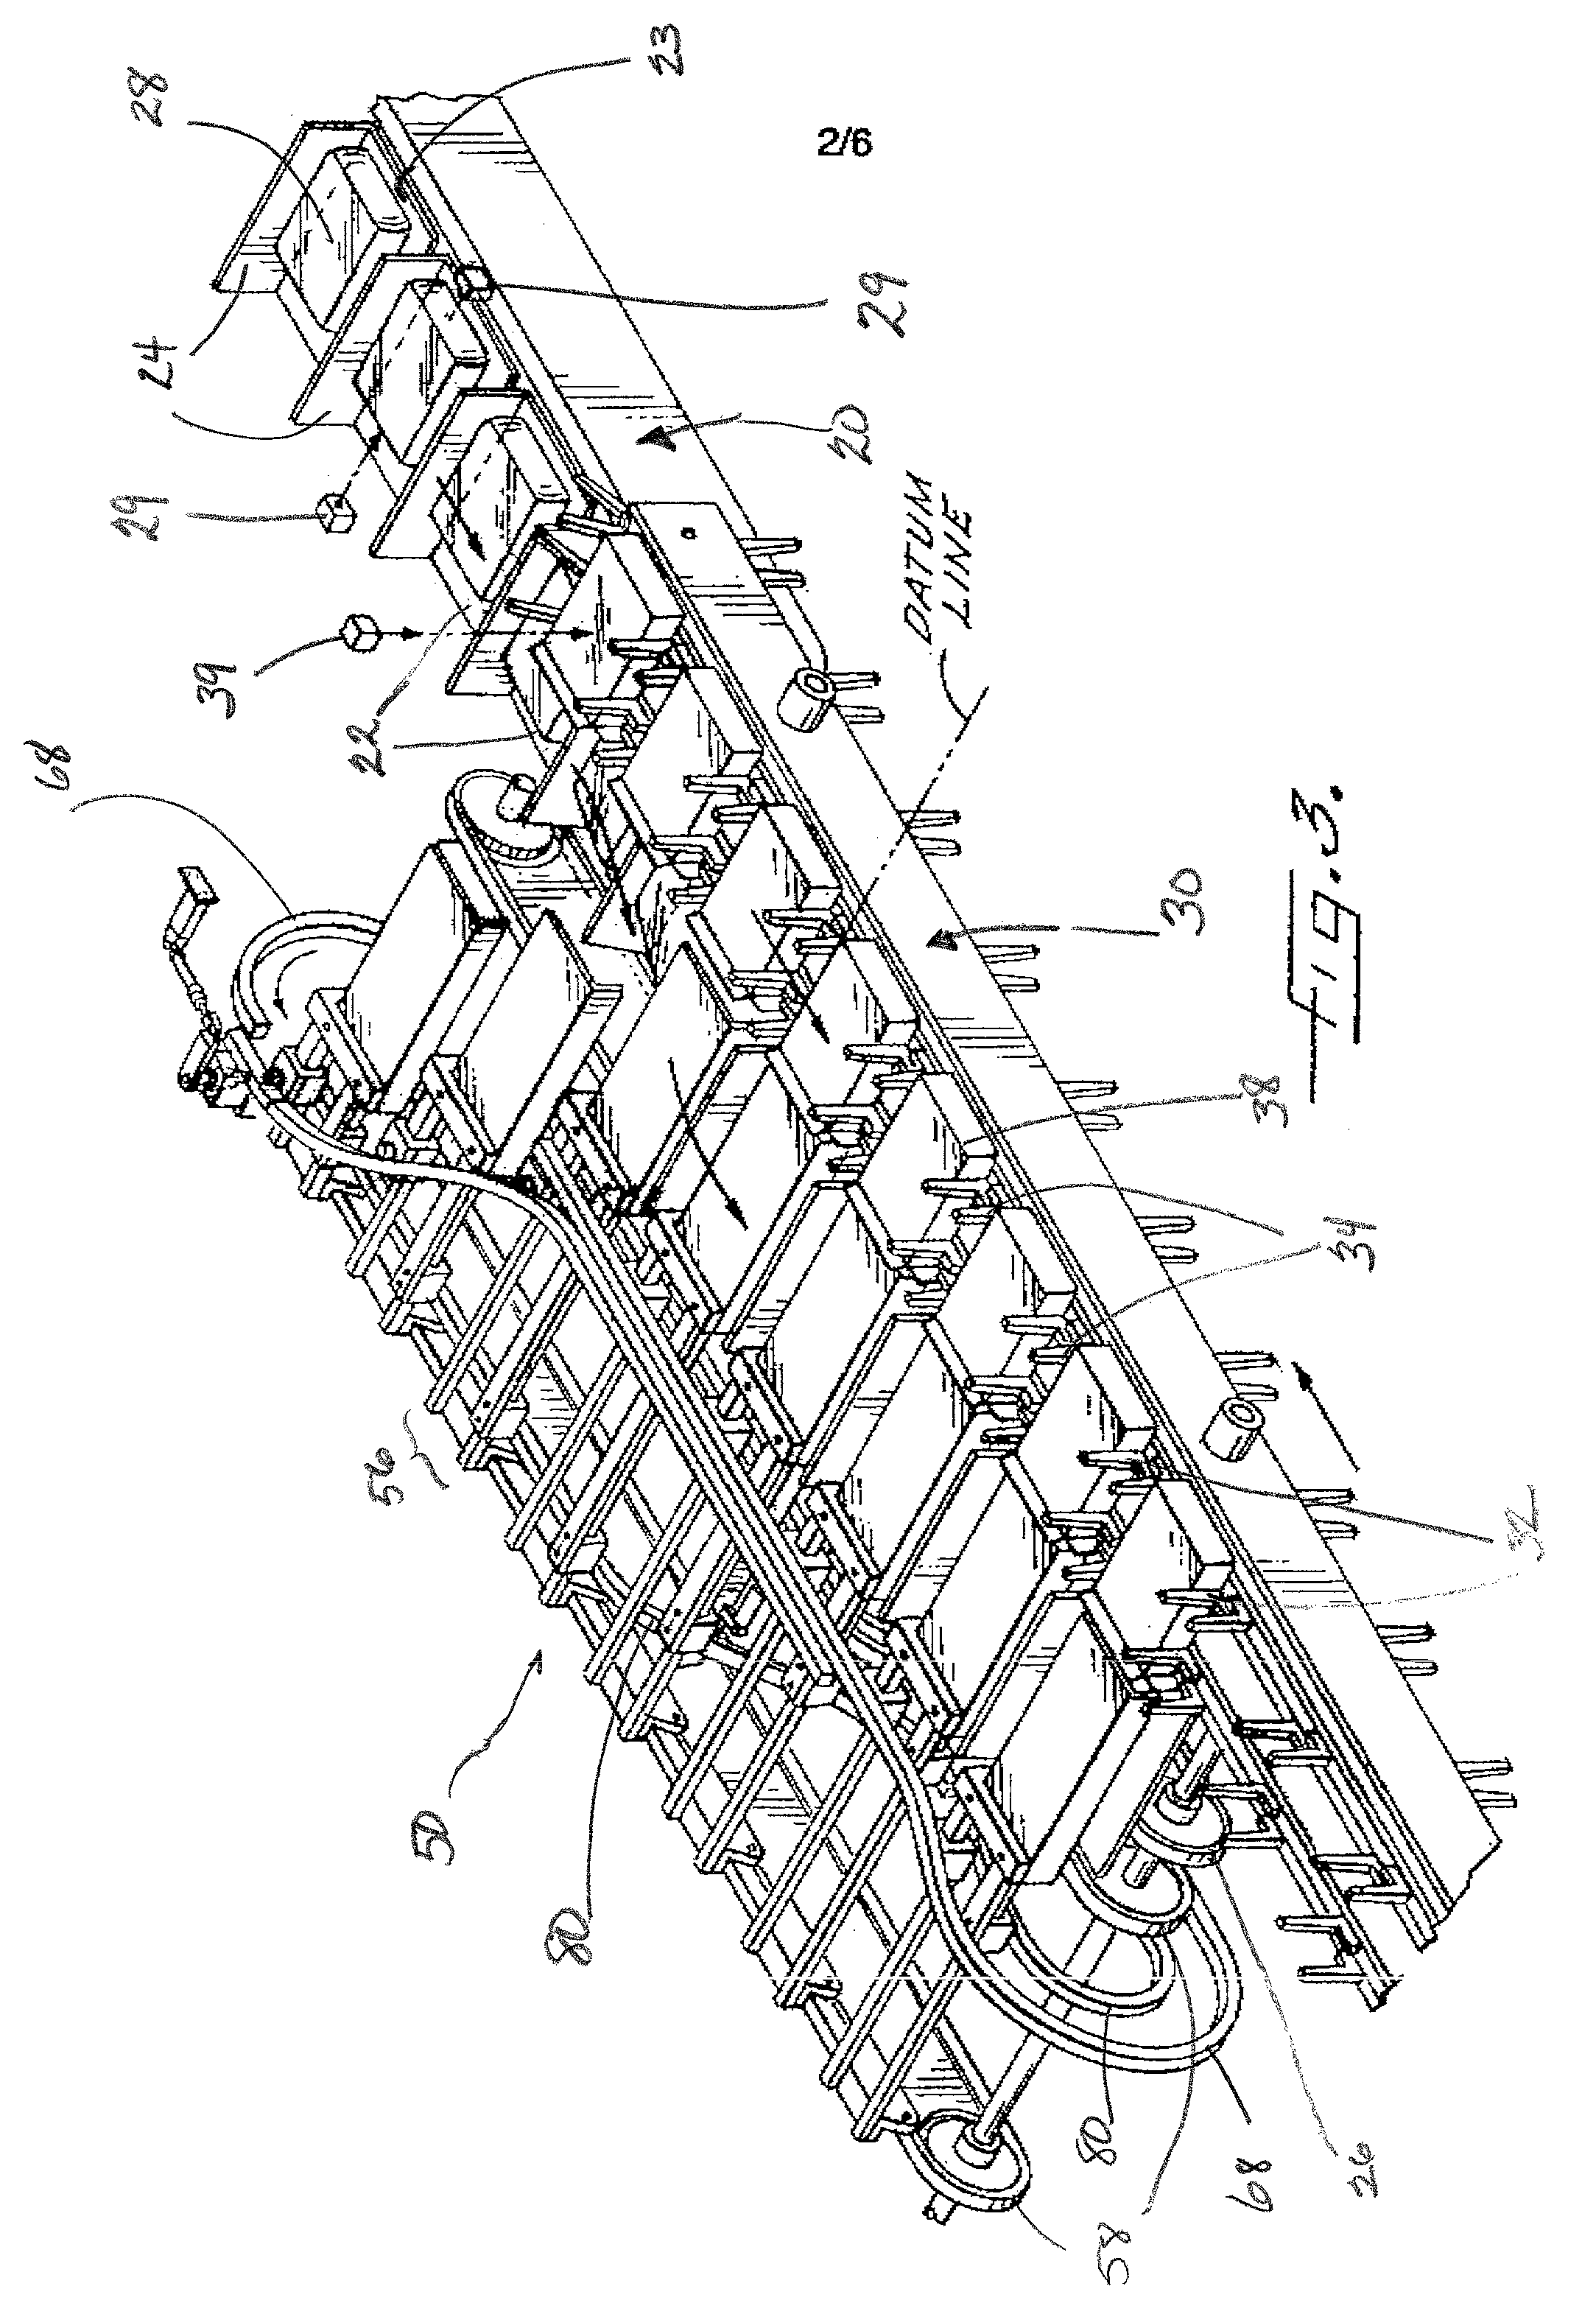 Integrated barrel loader and confiner apparatus for use in a cartoning system